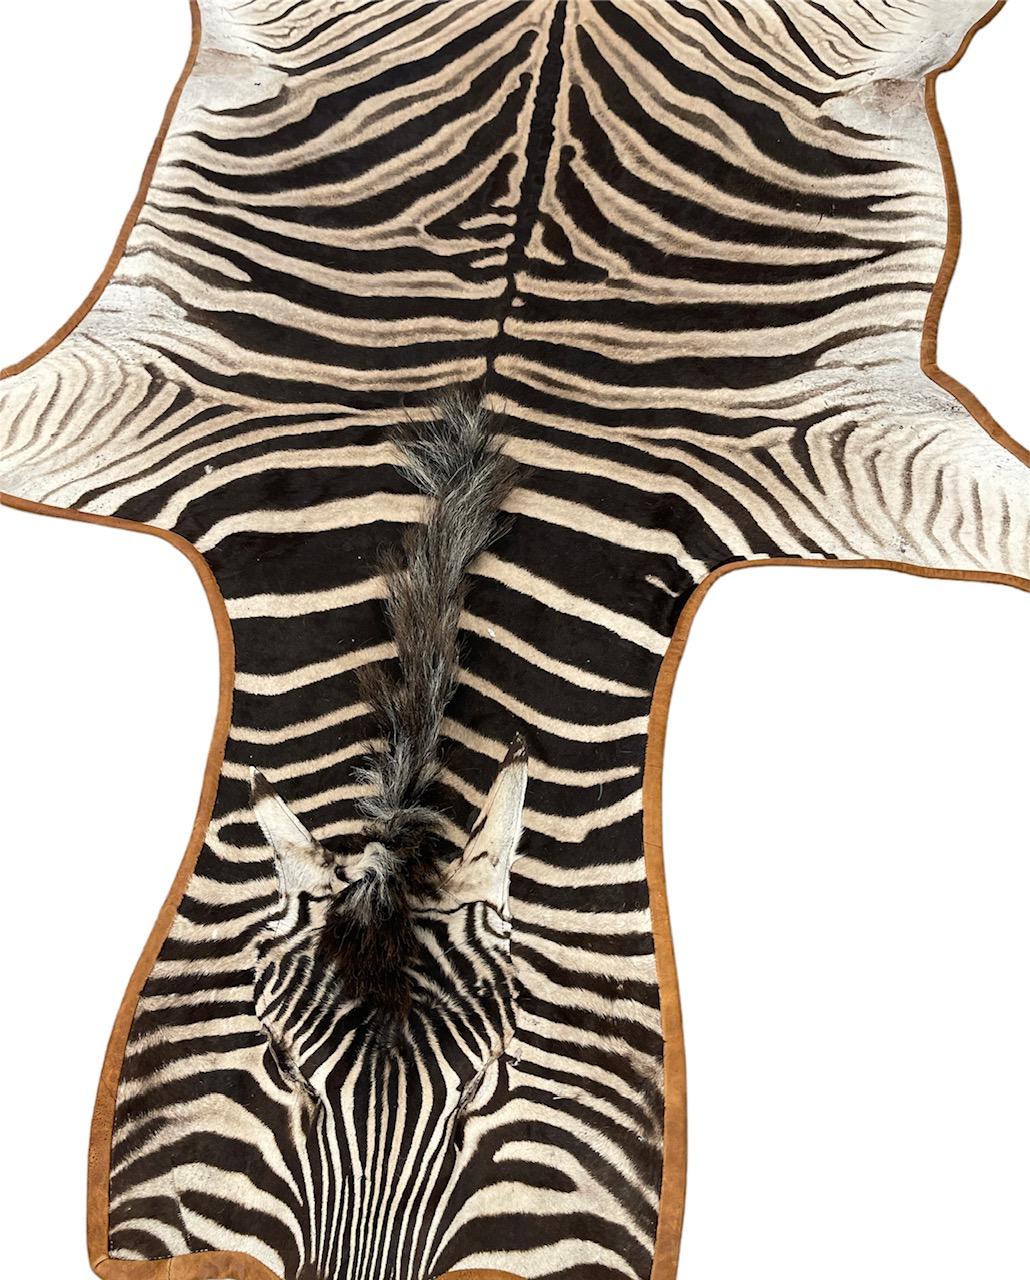 Gomez Zebra Hide Rug Trimmed in Light Brown Italian Leather In New Condition For Sale In Saint Louis, US